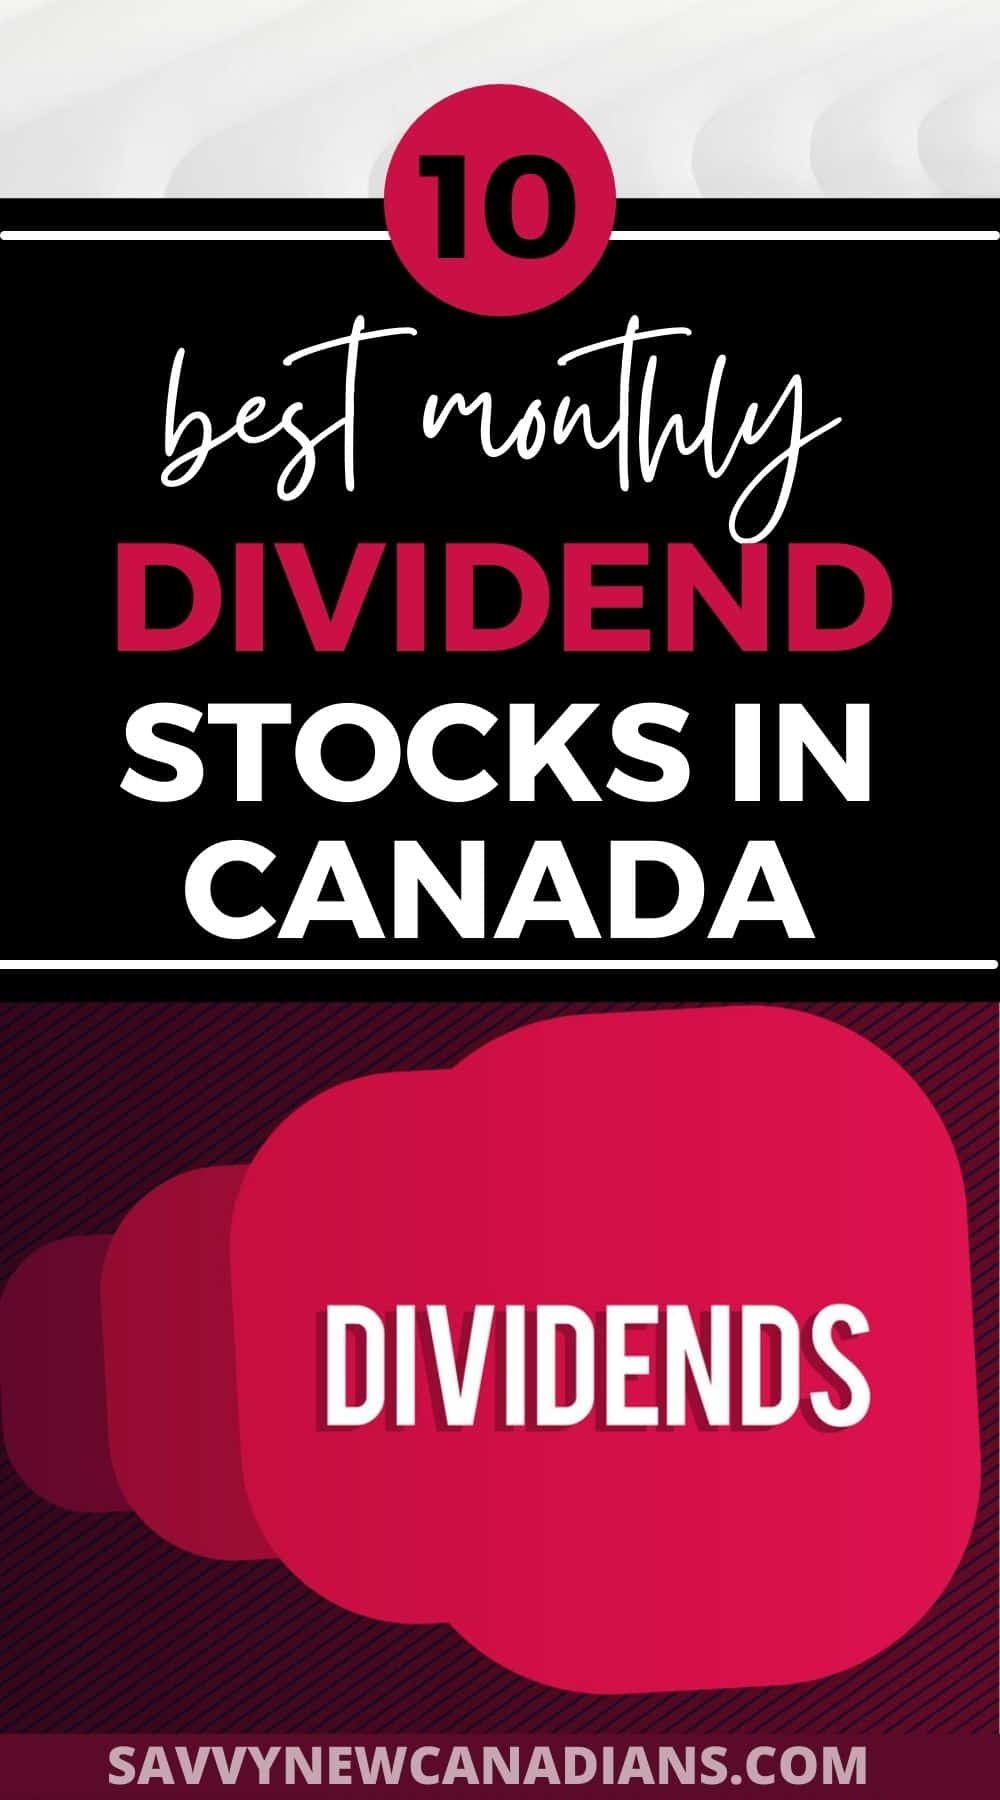 Best Monthly Dividend Stocks in Canada for 2022